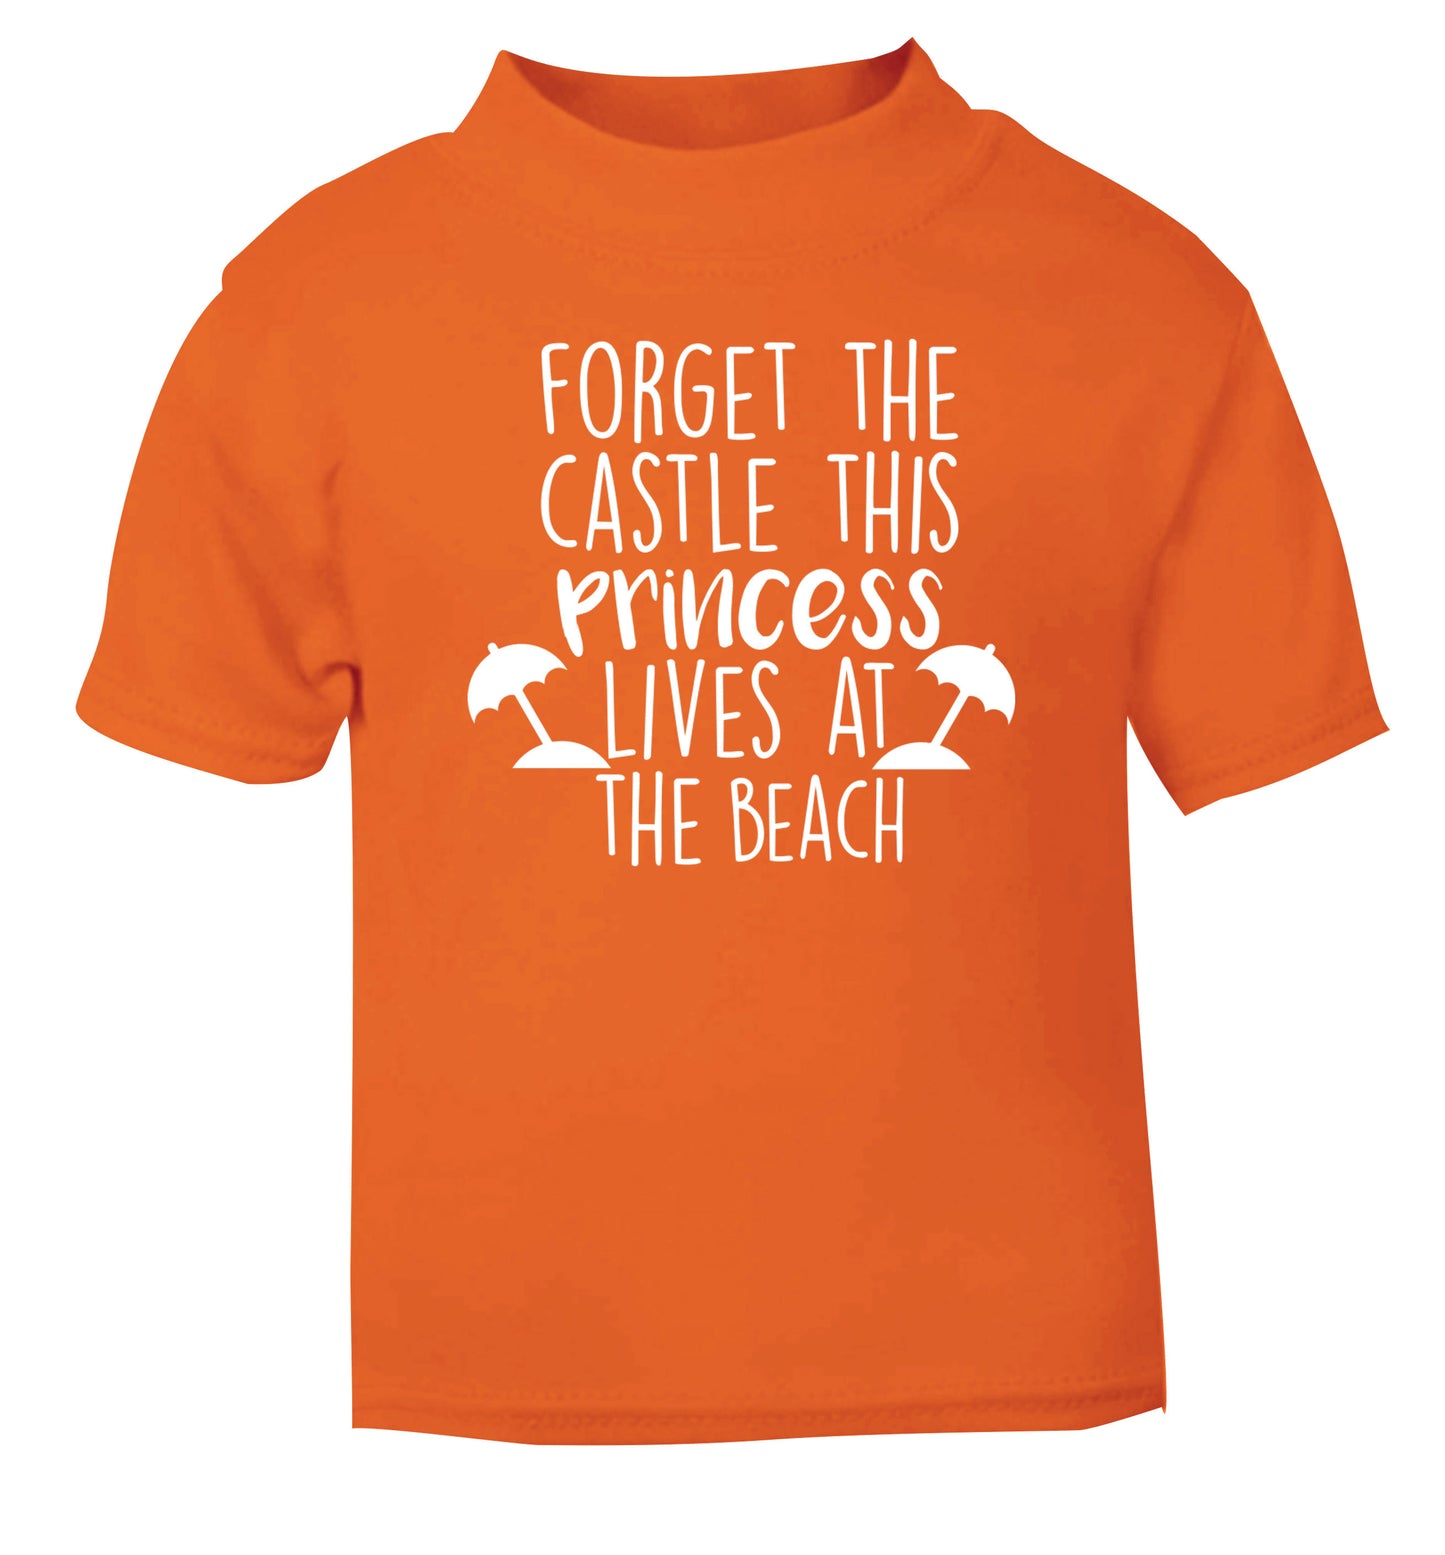 Forget the castle this princess lives at the beach orange Baby Toddler Tshirt 2 Years